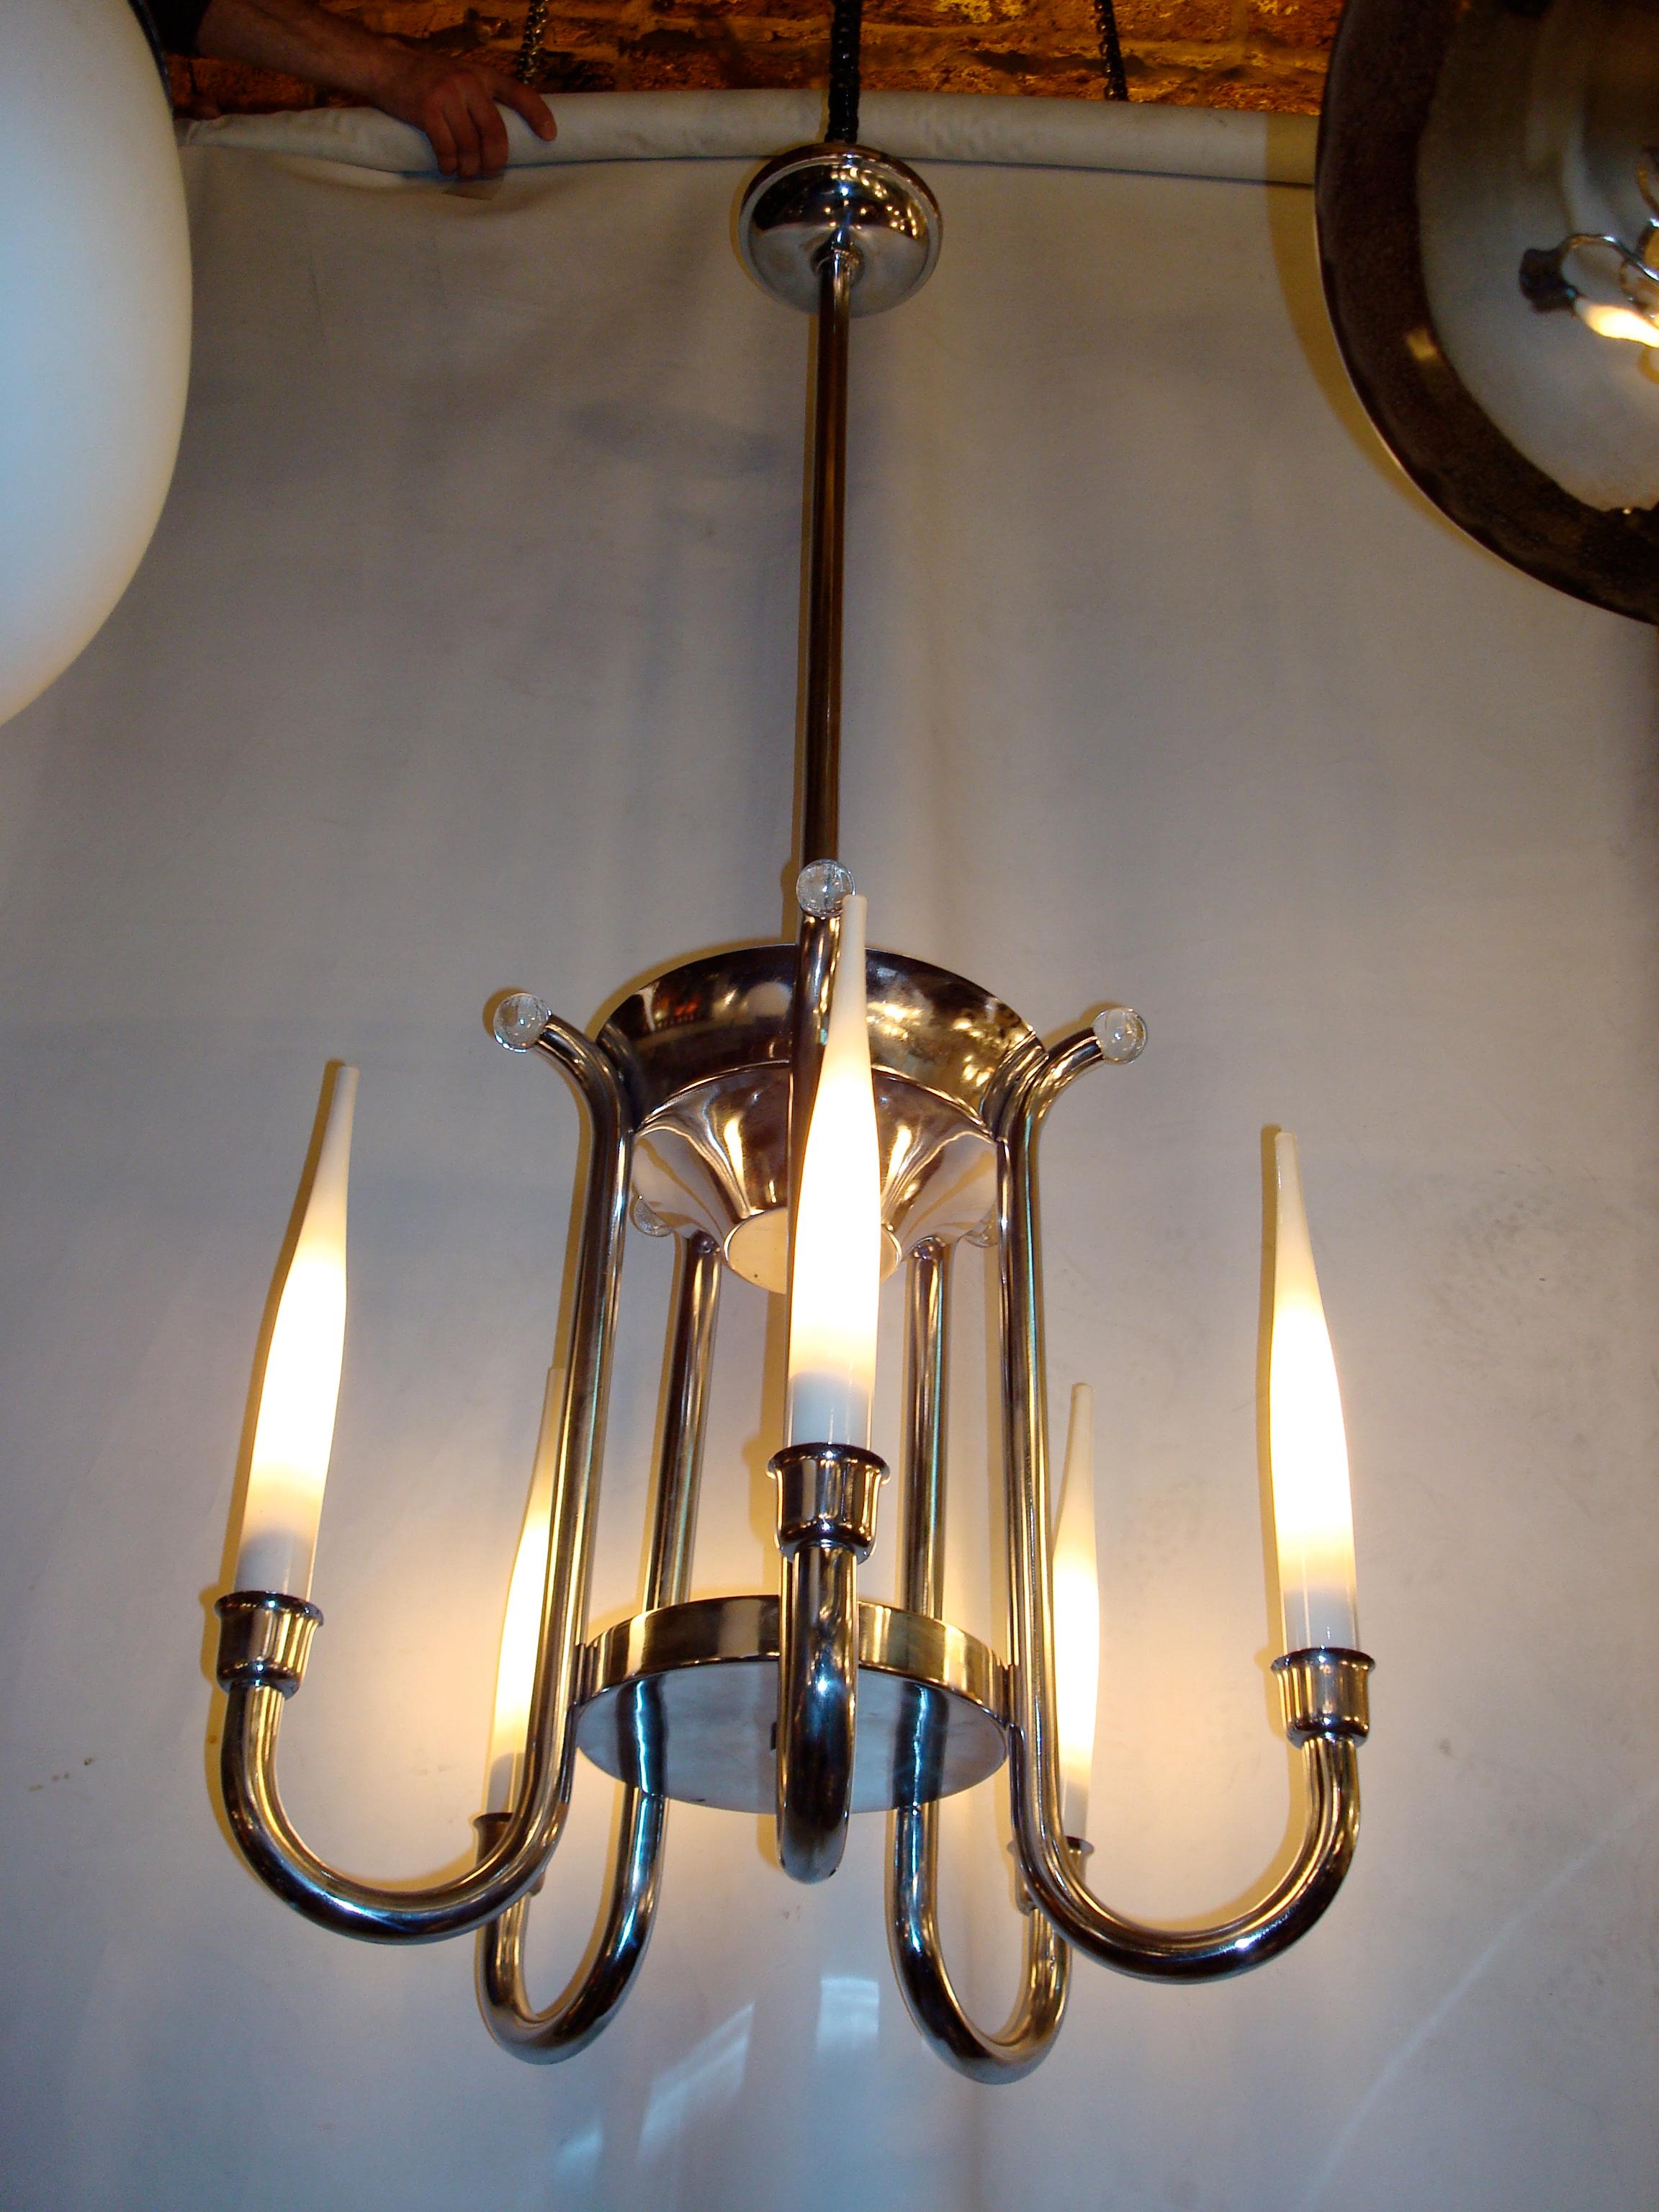 Amaizing hanging lamp

Material: Chromed bronze, opaline glass.
Style: Art Deco
Country: German
If you are looking for sconces to match your ceiling lighting, we have what you need.
To take care of your property and the lives of our customers, the